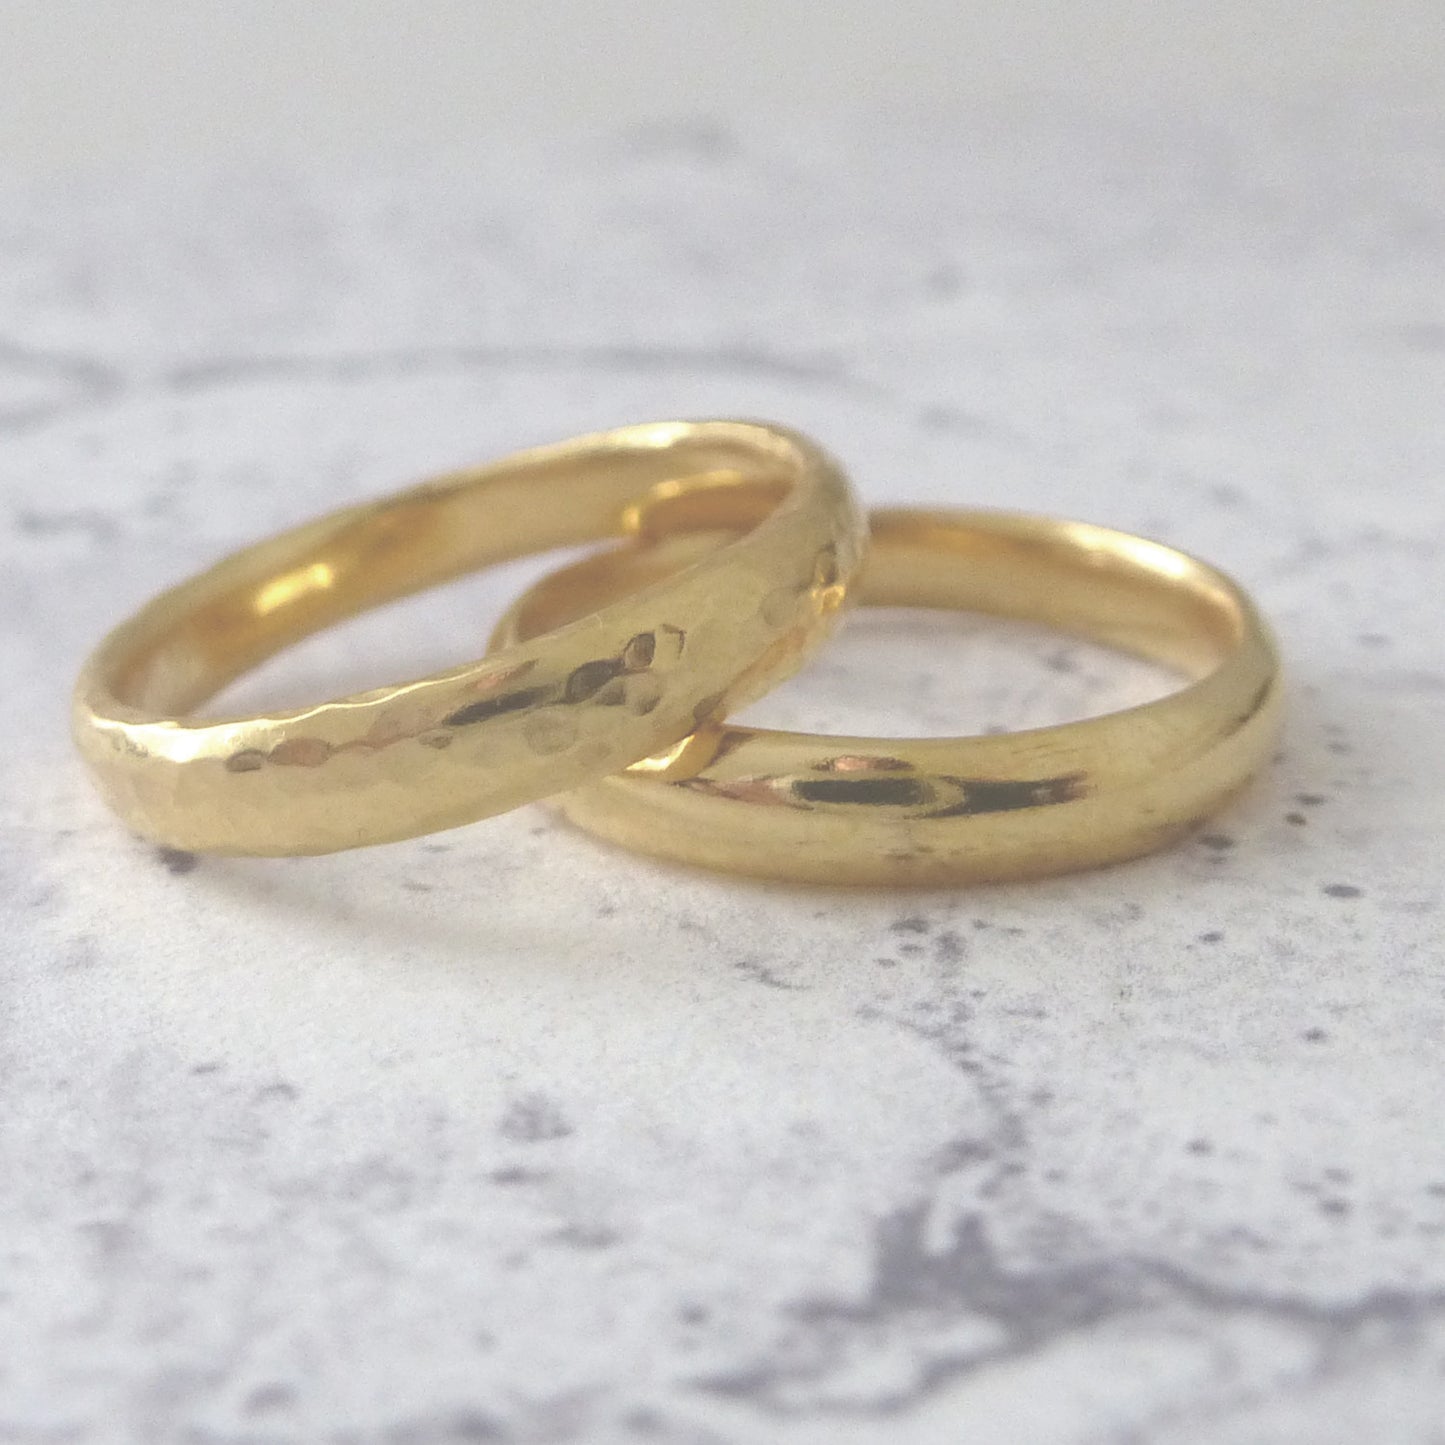 Slim Band Ring in 18ct Yellow Gold - 3mm - Hammered or Smooth